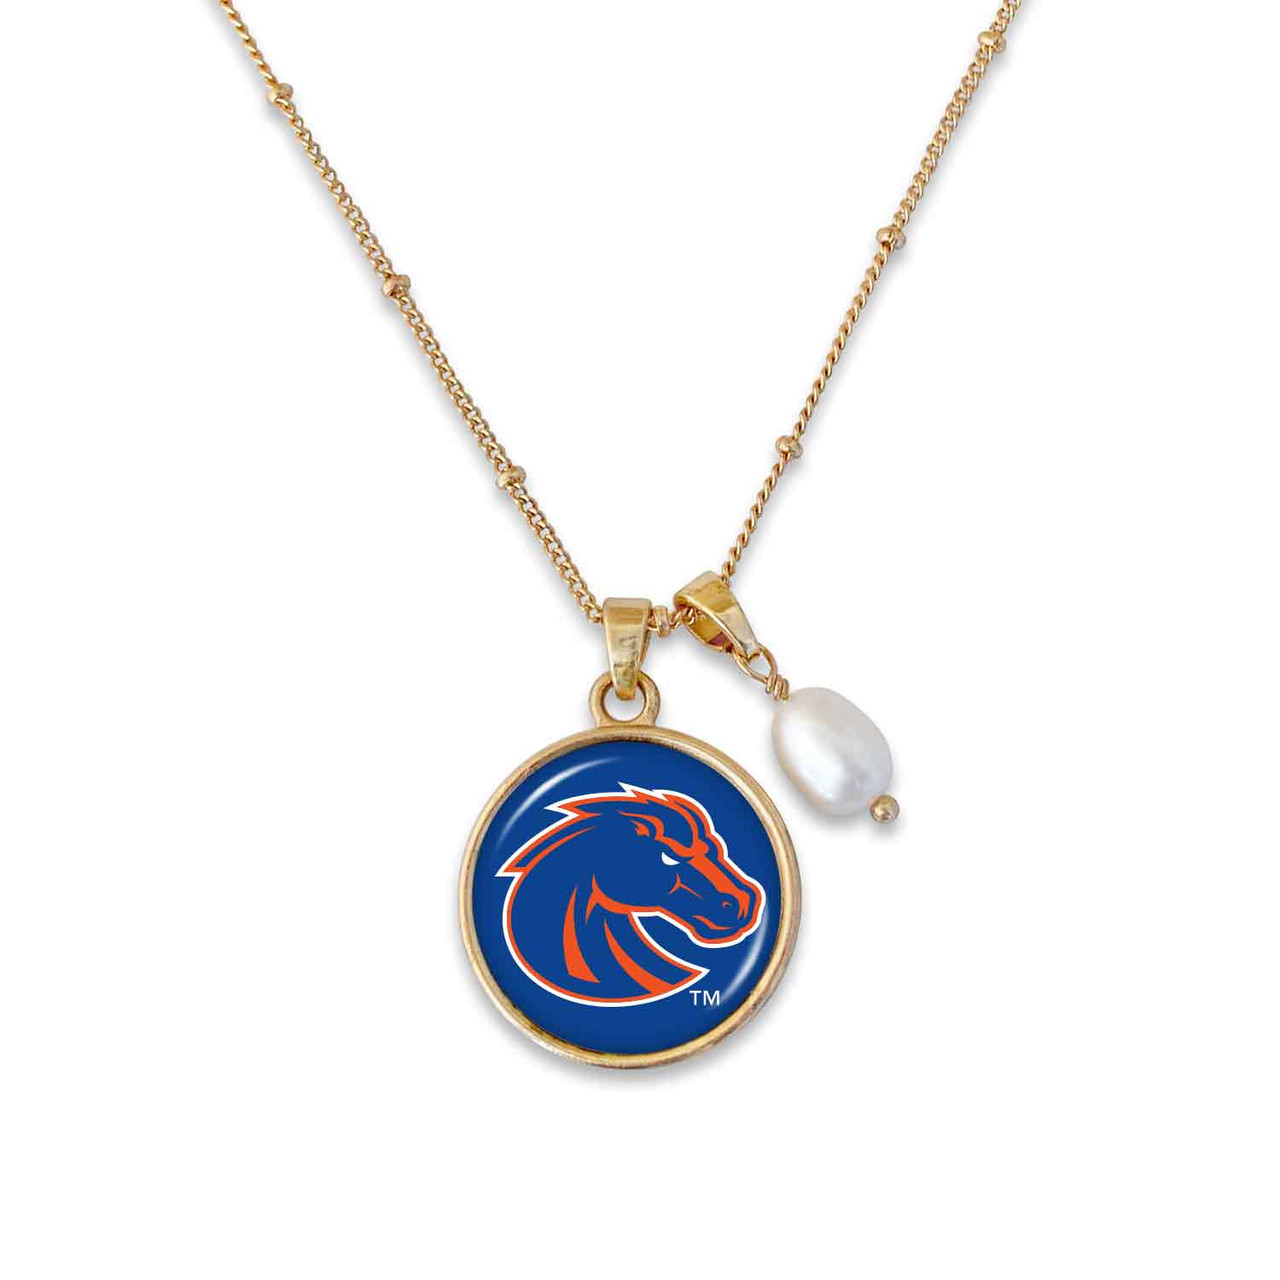 Boise State Broncos Necklace - Diana